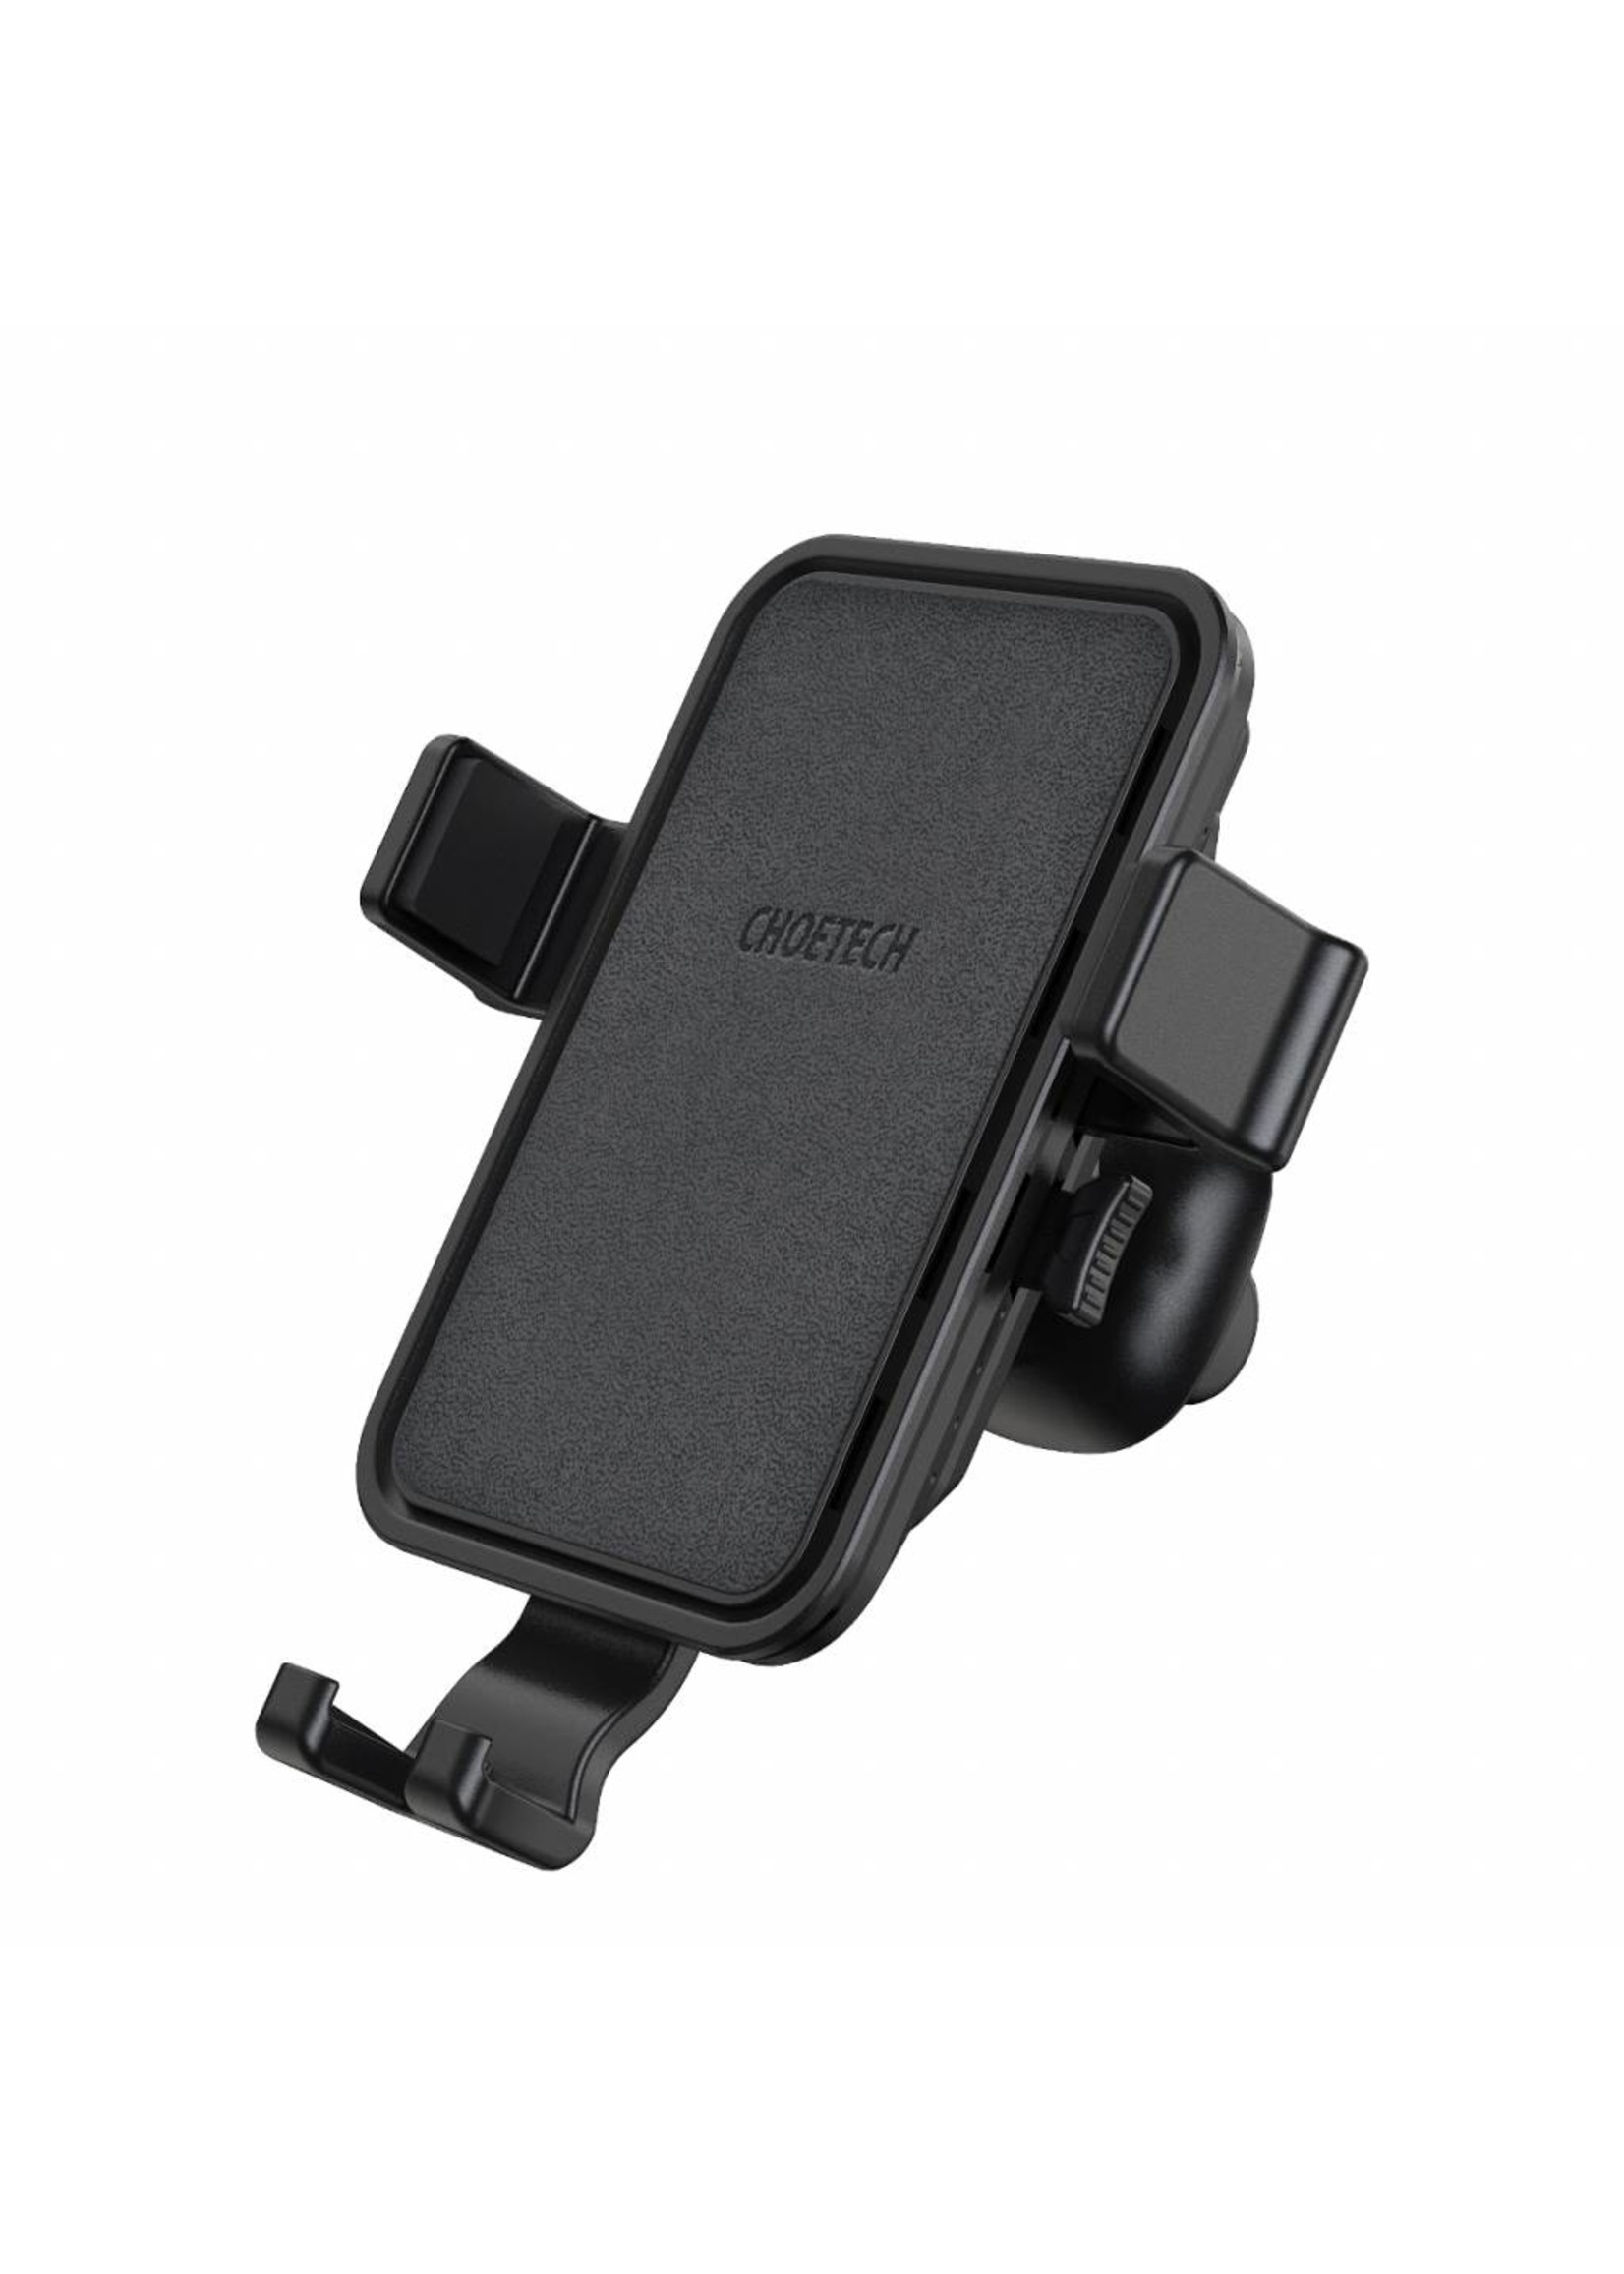 Choetech - Wireless Qi charger for in the car - Fast Charge - 10W - 360 degrees rotatable - Black